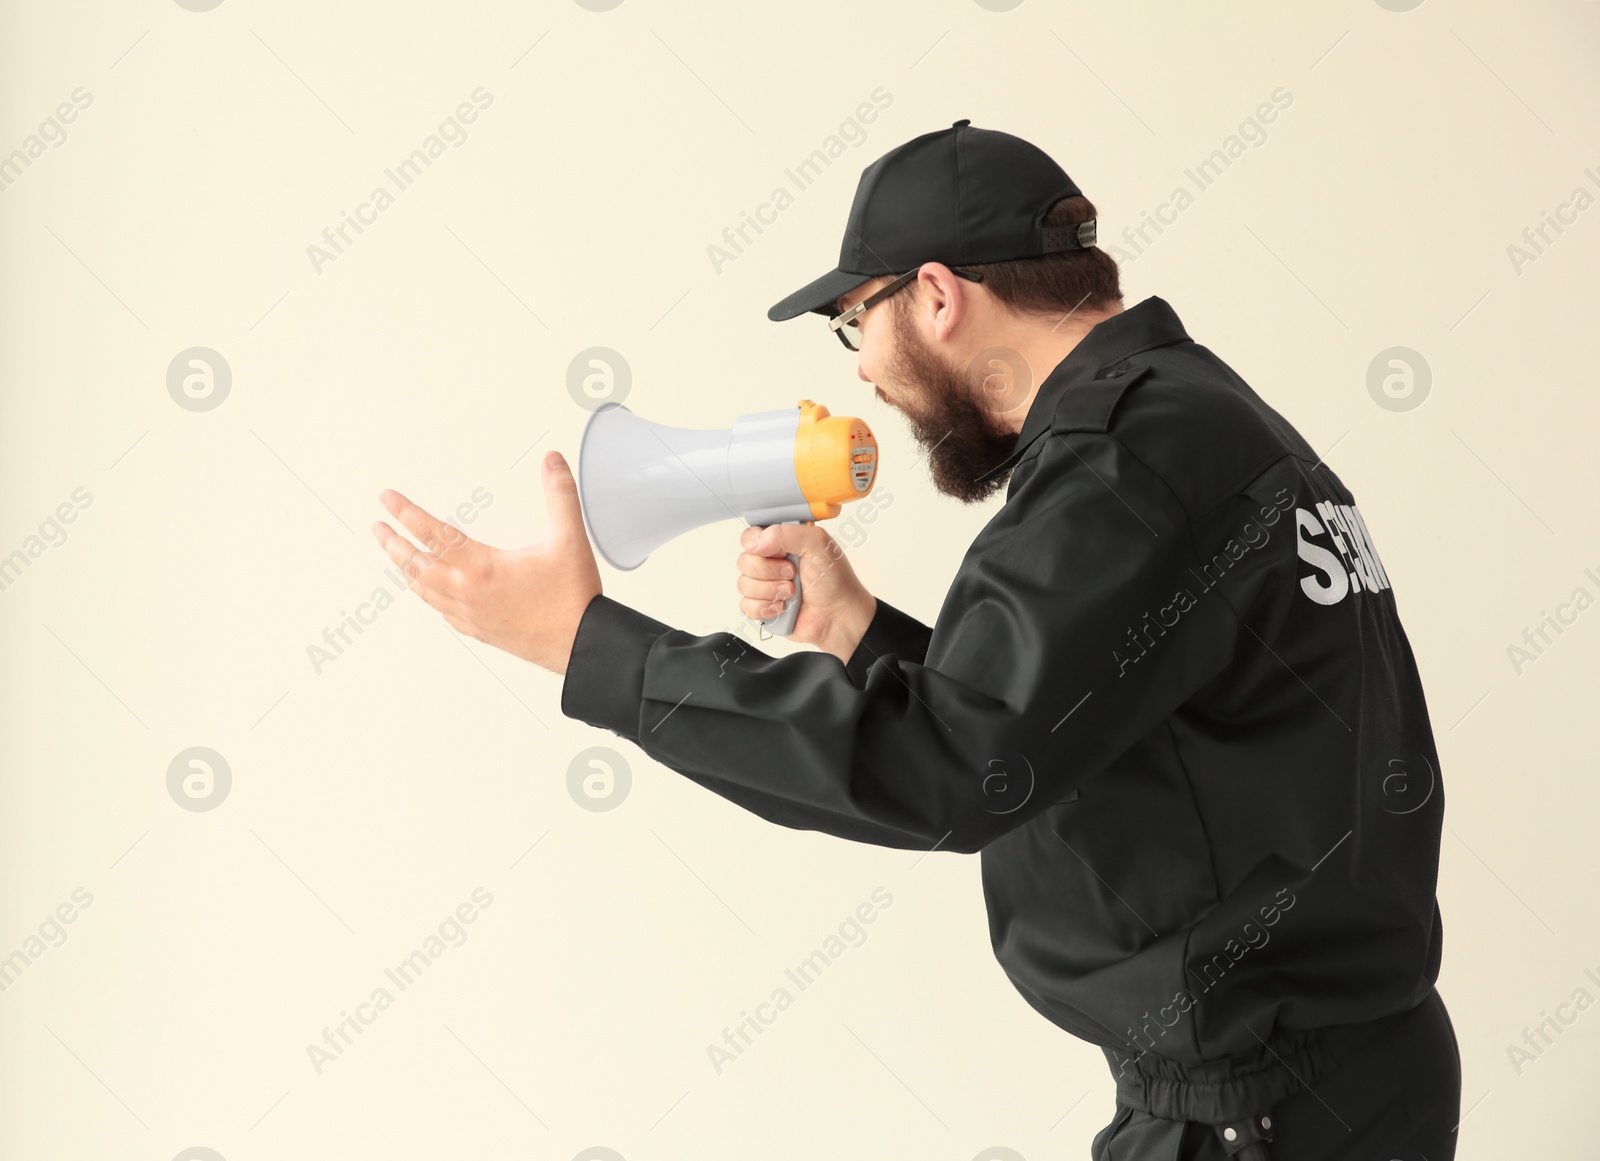 Photo of Security guard shouting into megaphone indoors